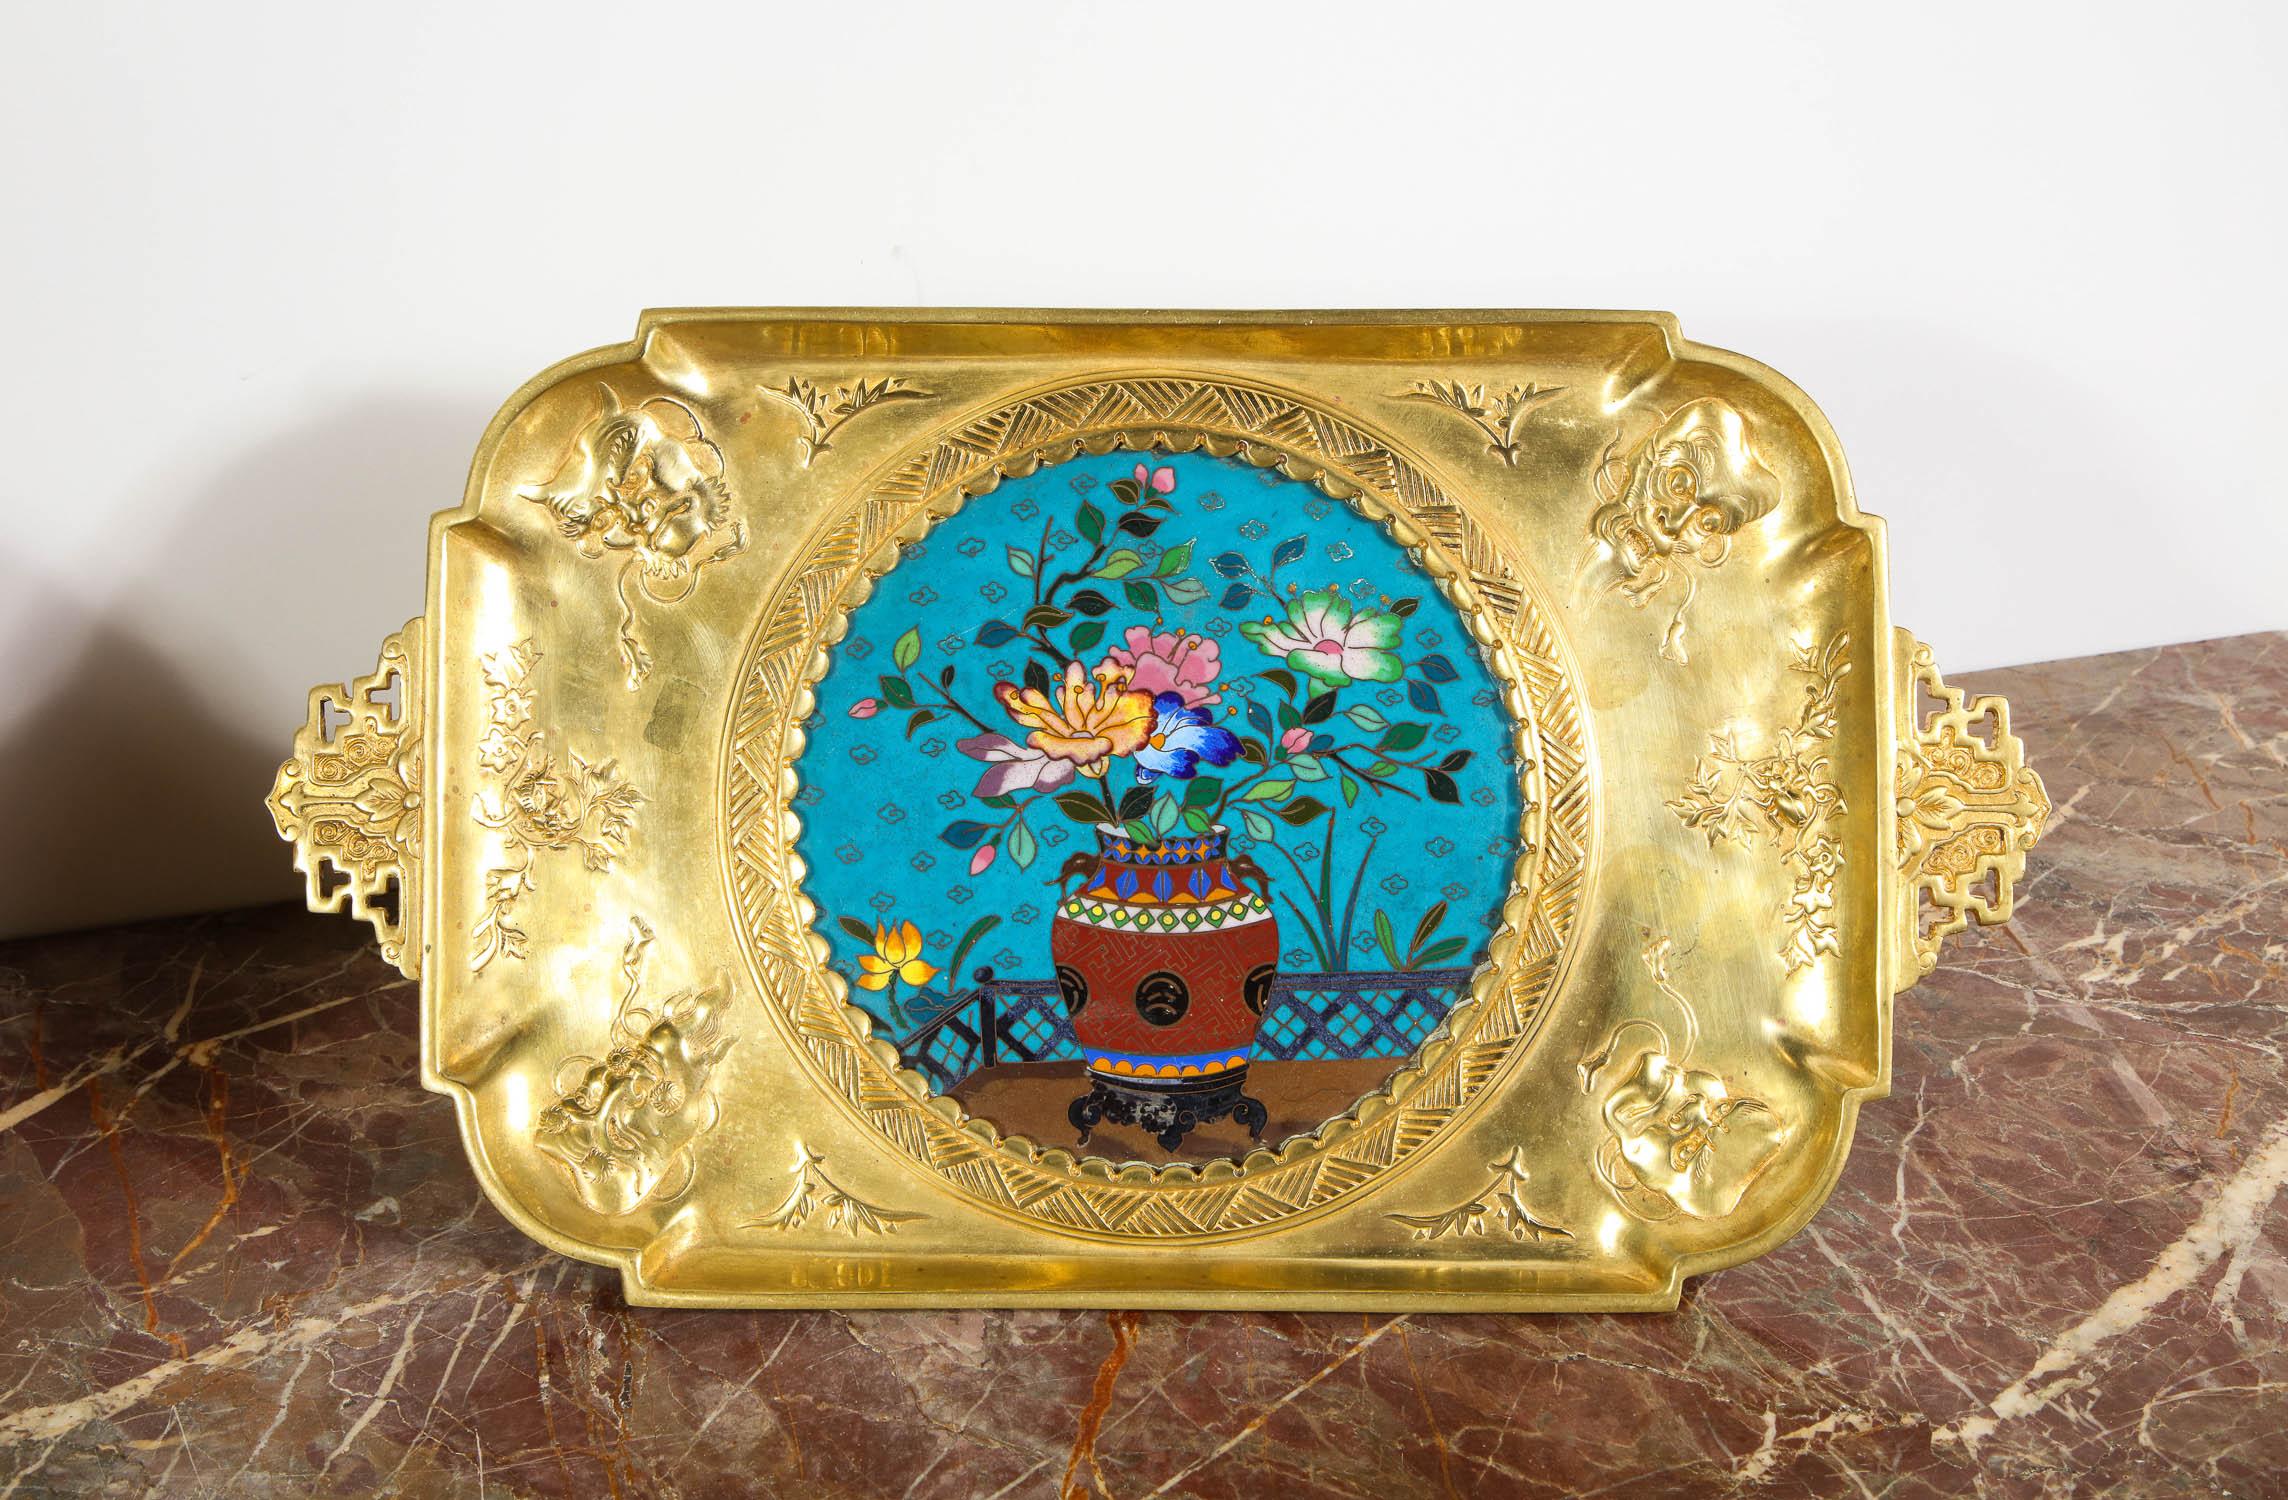 19th Century Rare Pair of French Japonisme Bronze & Cloisonne Enamel Trays Attributed Lievre